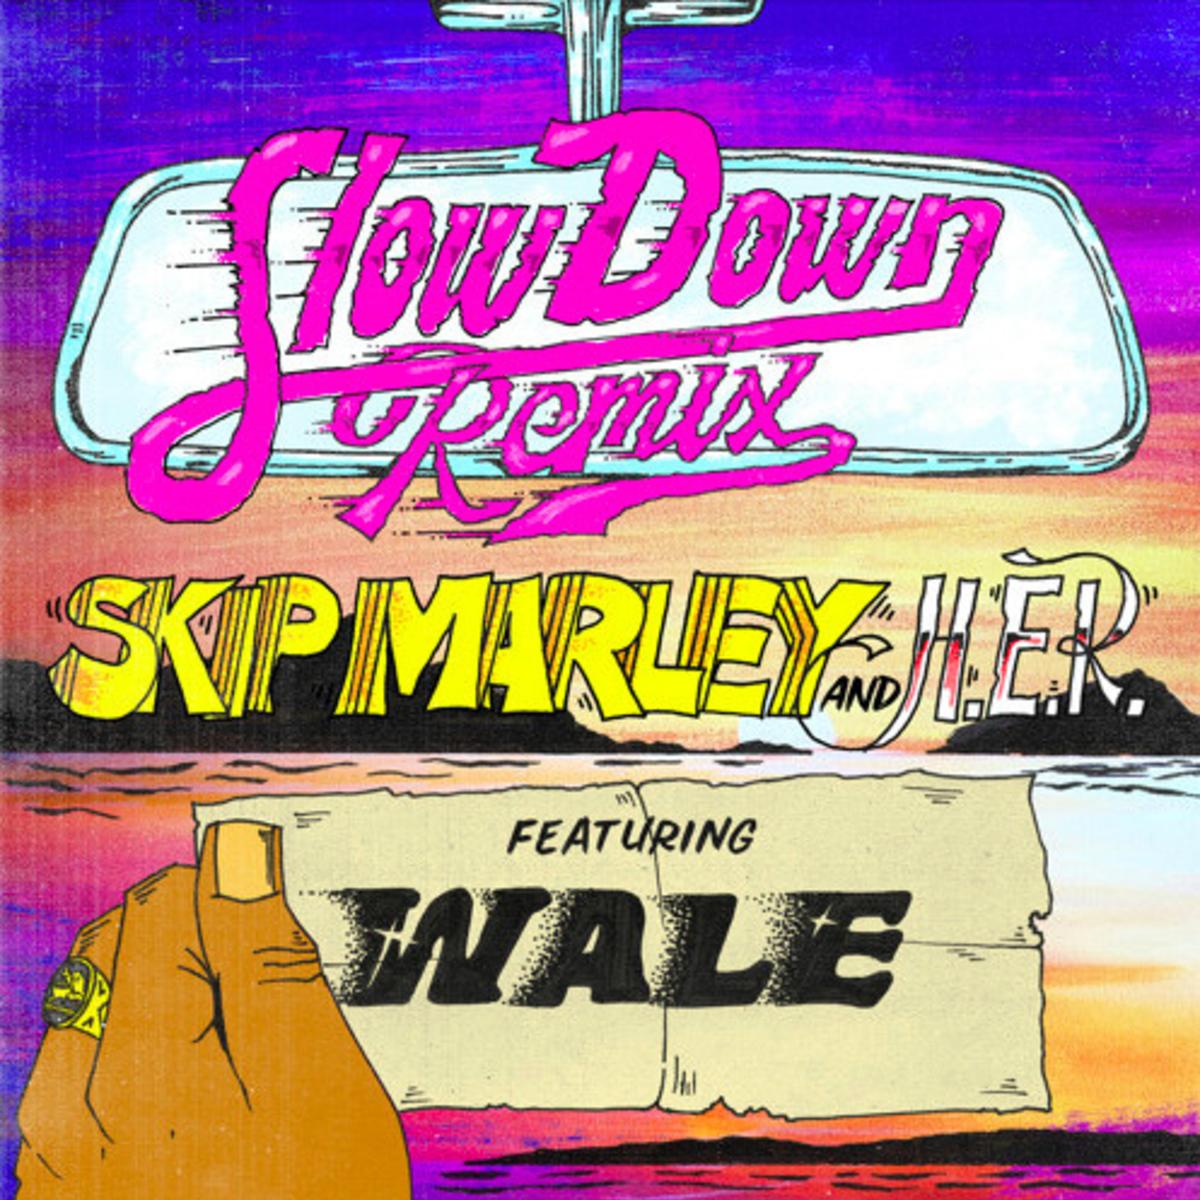 Wale Gets Added To “Slow Down” By H.E.R. & Skip Marley